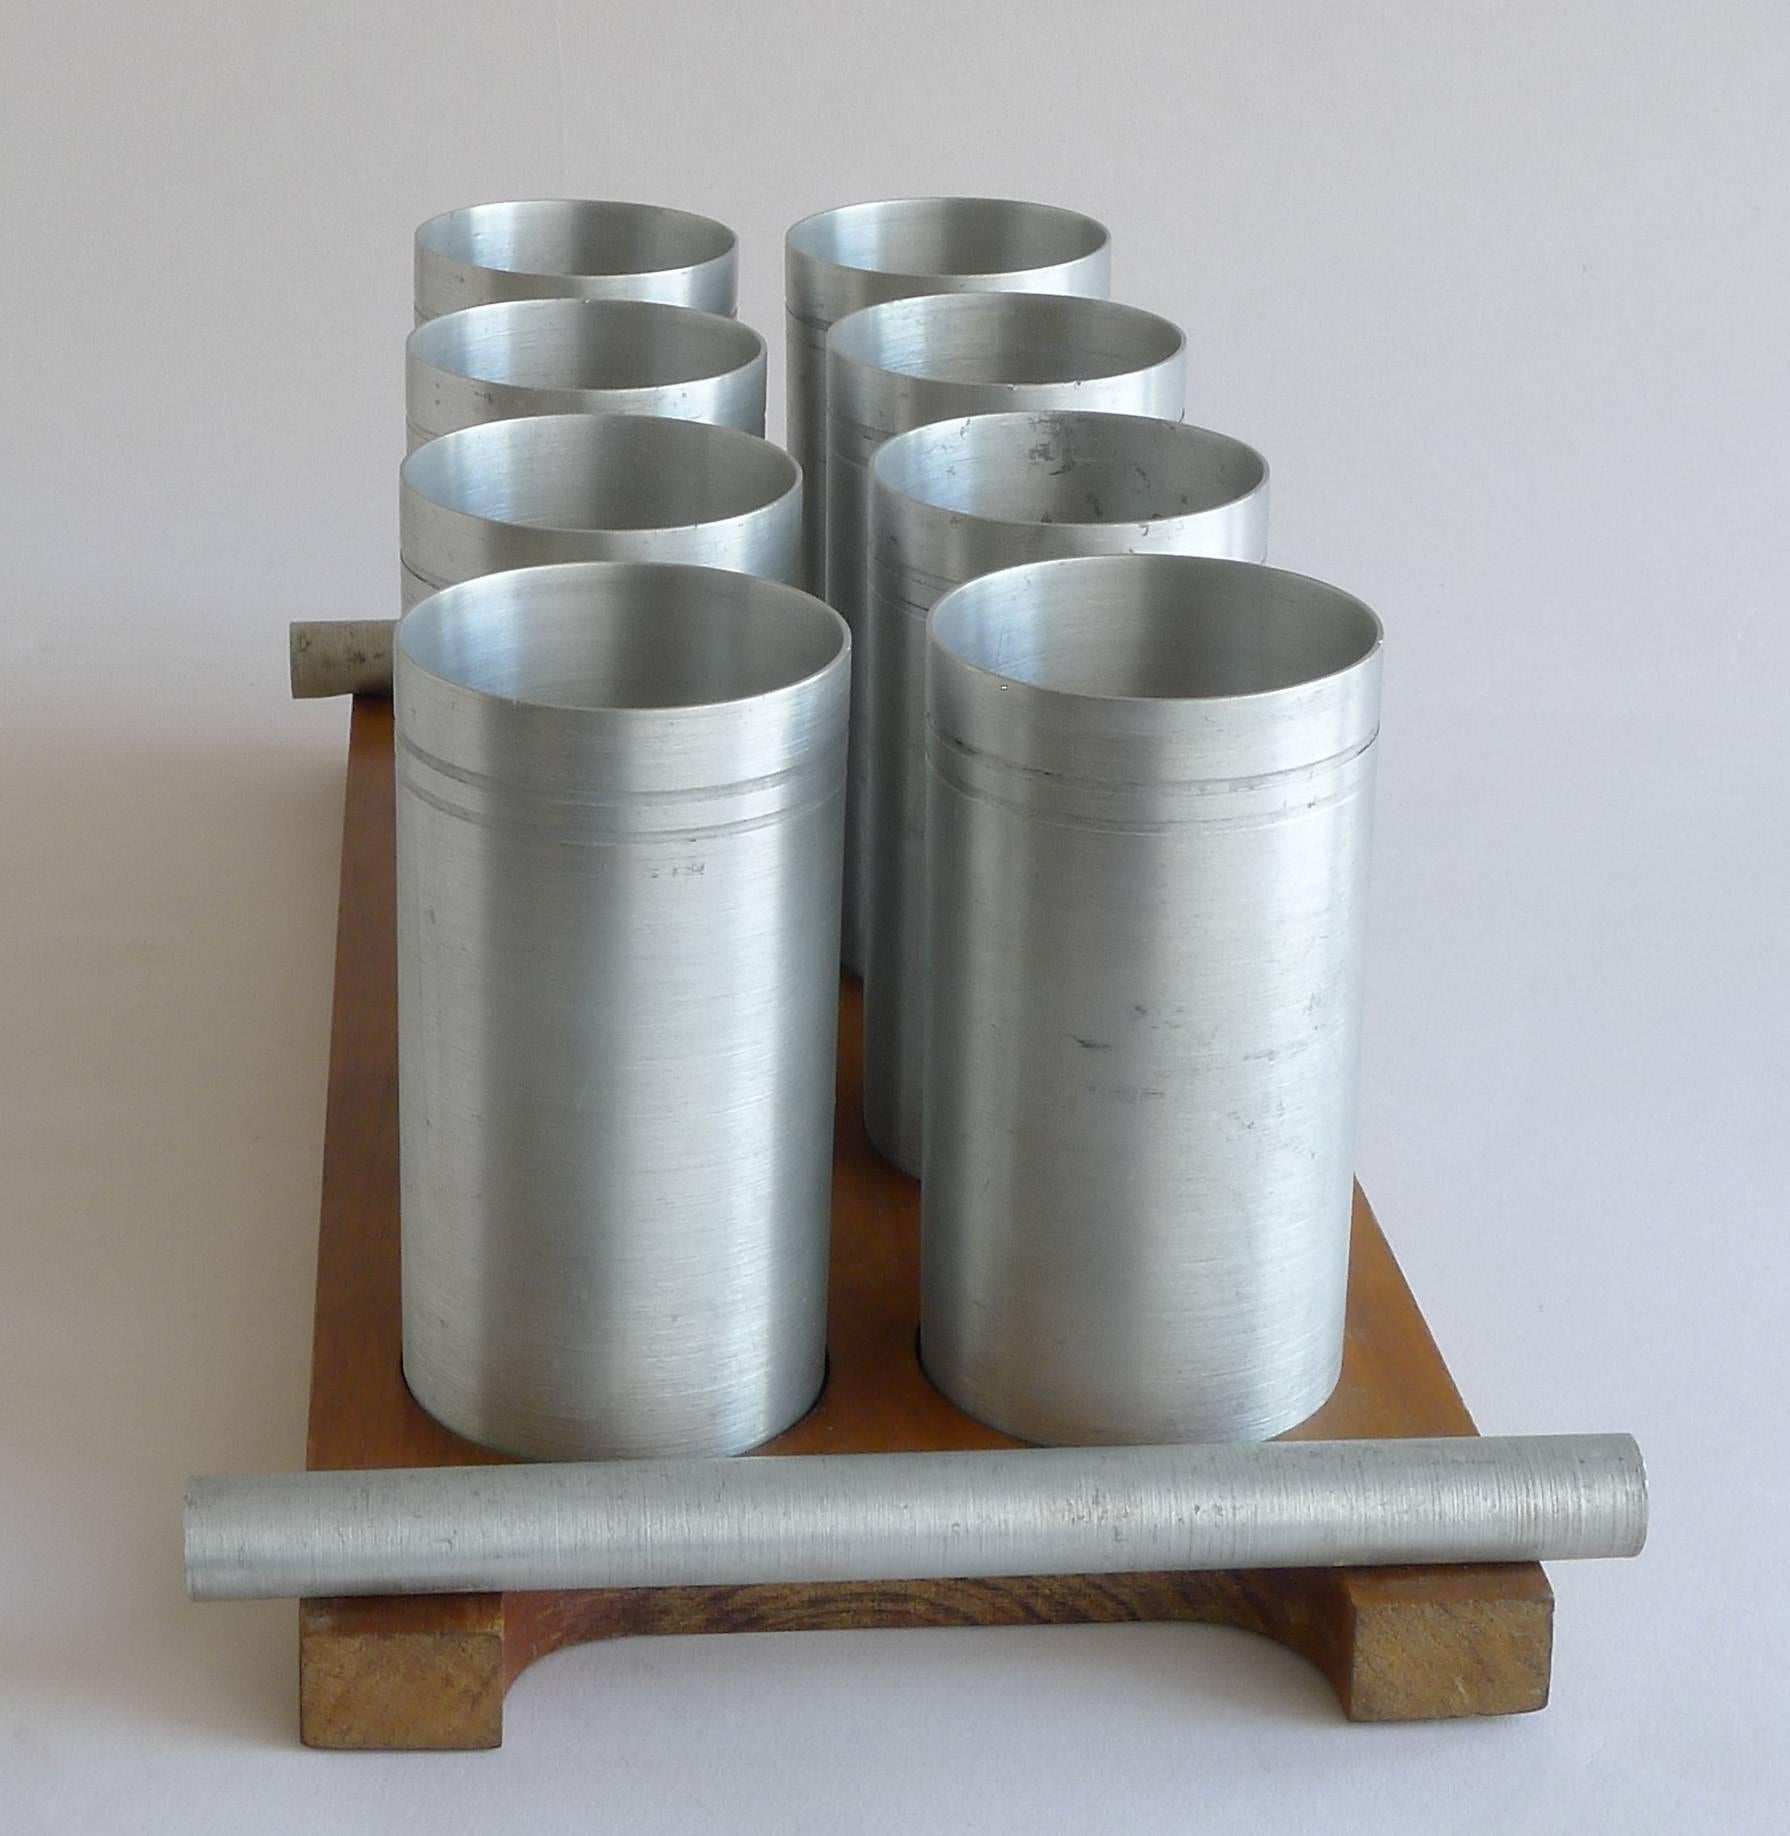 1940s Art Deco wood and satin aluminium cup set. Set includes eight cups, each with incised double line just below the lip. Wood tray has two satin aluminium tube handles. Bottom of tray has a 